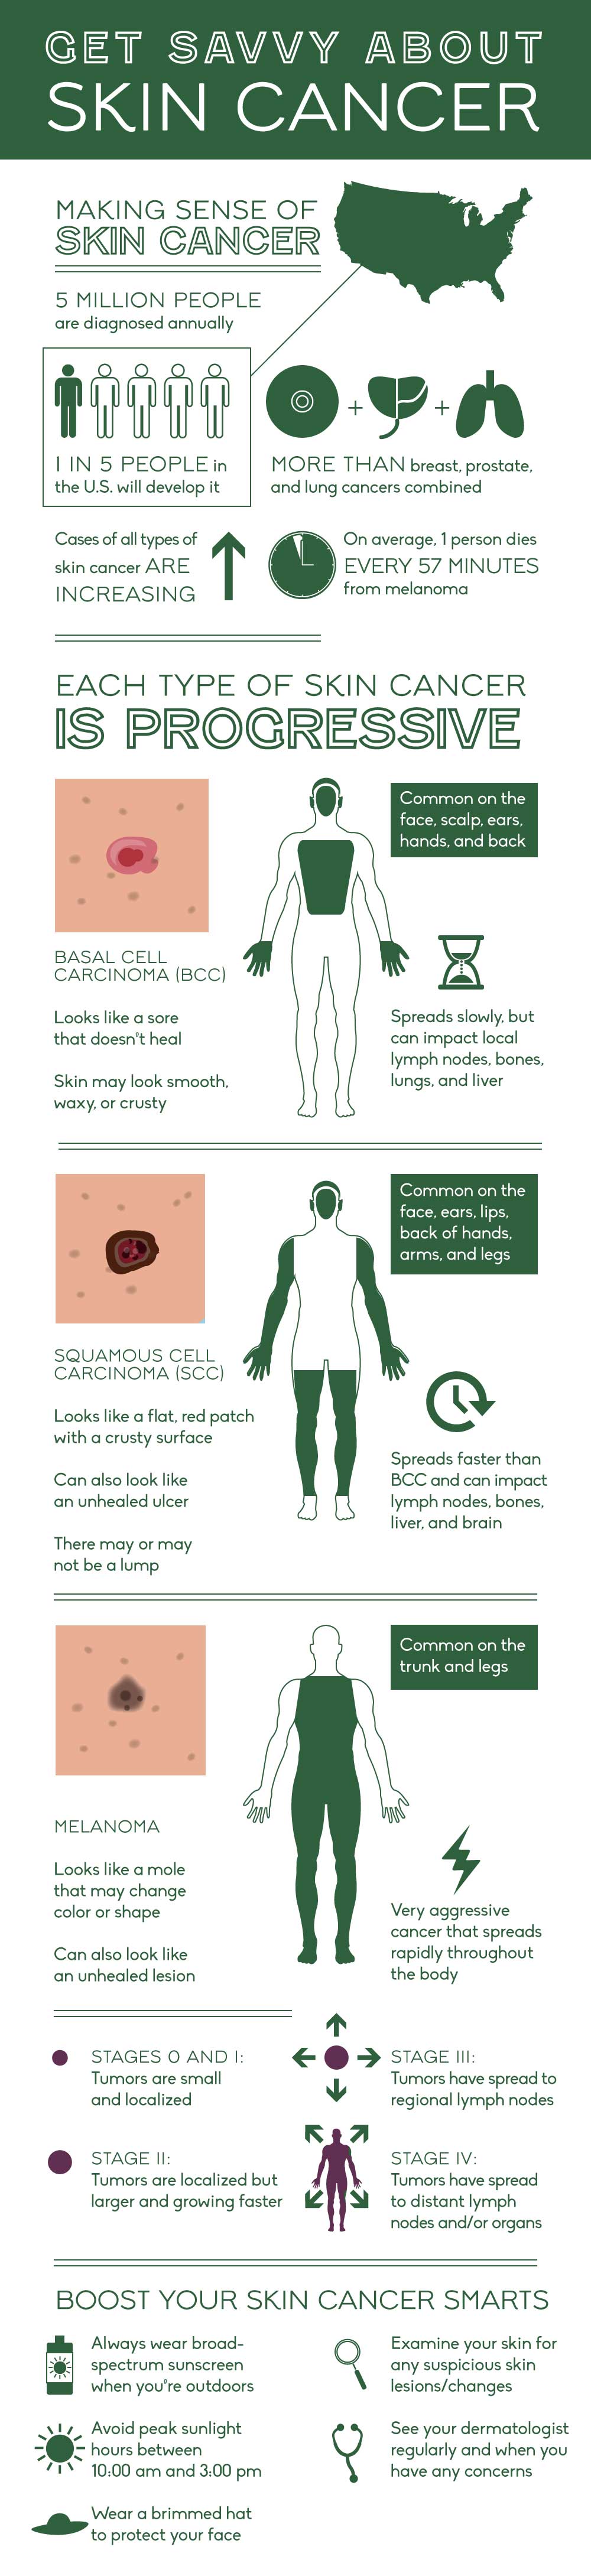 treatment-triggers-How-to-detect-skin-cancer-on-your-skin-Full-body-infographic